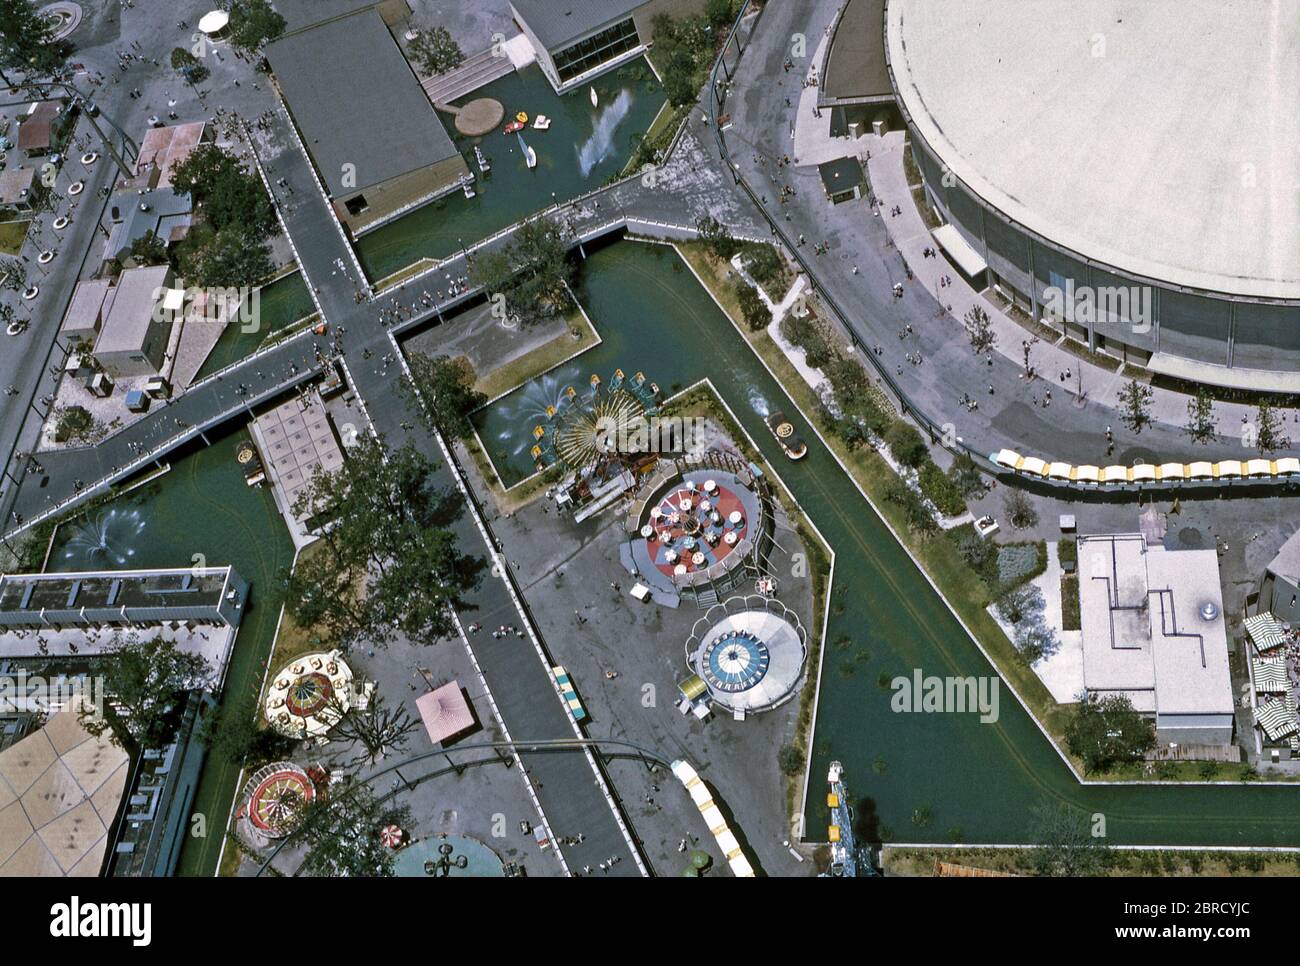 An overhead view of 'HemisFair '68', an official World's Fair (Expo or International Exposition) held in San Antonio, Texas, USA in 1968. The photograph was taken from The Tower of the Americas. The waterway system with boats on snakes through the site as do two 'Mini-Monorail' trains. The HemisFair Arena is top right. Stock Photo